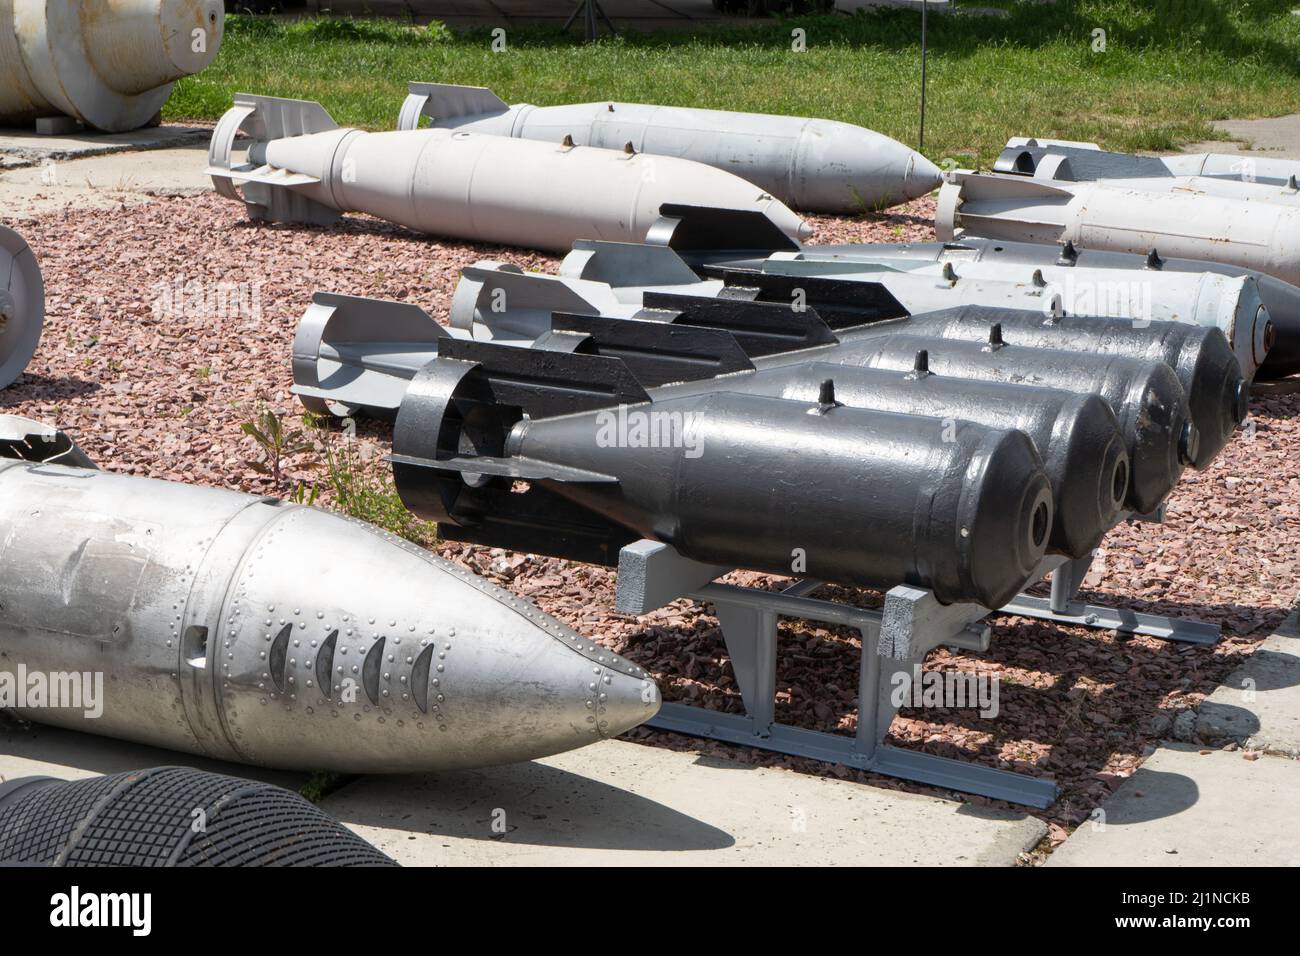 Bombs and missiles that are dropped from bombers. Aircraft rocket and bomb in the museum. Weapons of mass destruction. Stock Photo